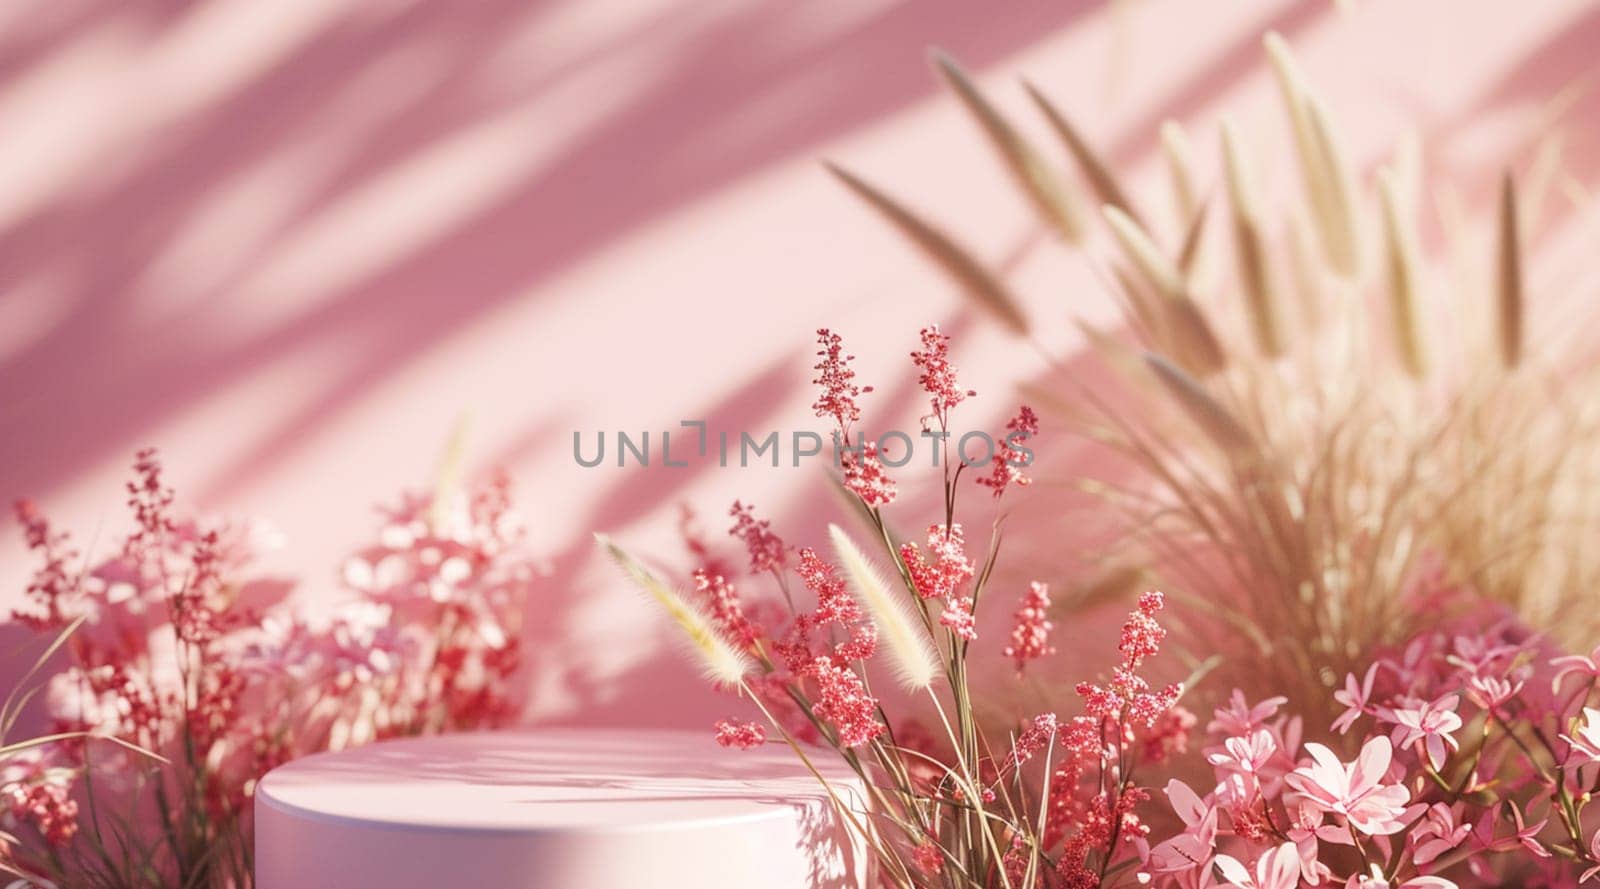 A serene scene with a cylindrical podium amid dried flowers and soft pink hues. High quality photo